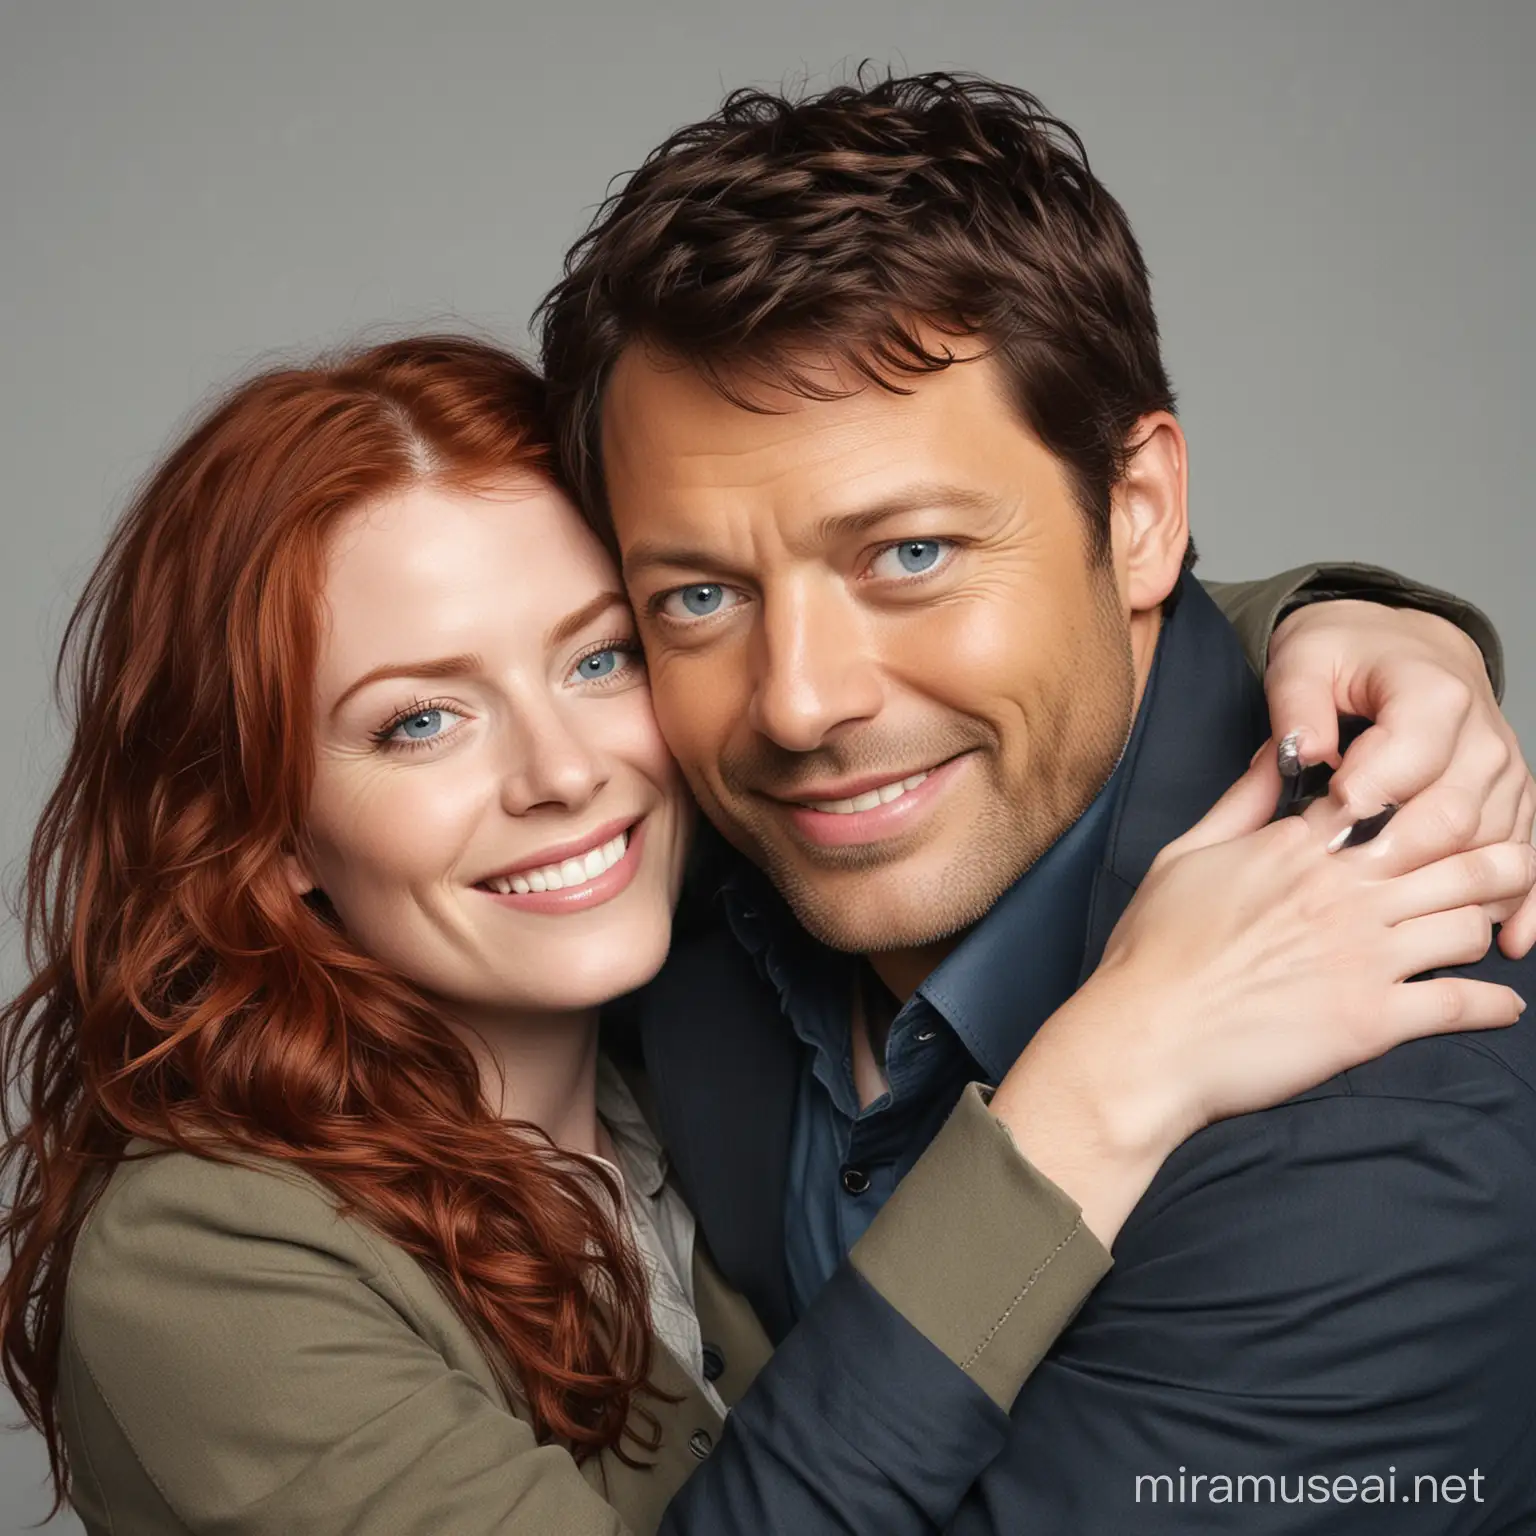 Celebrity Misha Collins Embraces RedHaired Woman with Blue Eyes in Joyful Encounter